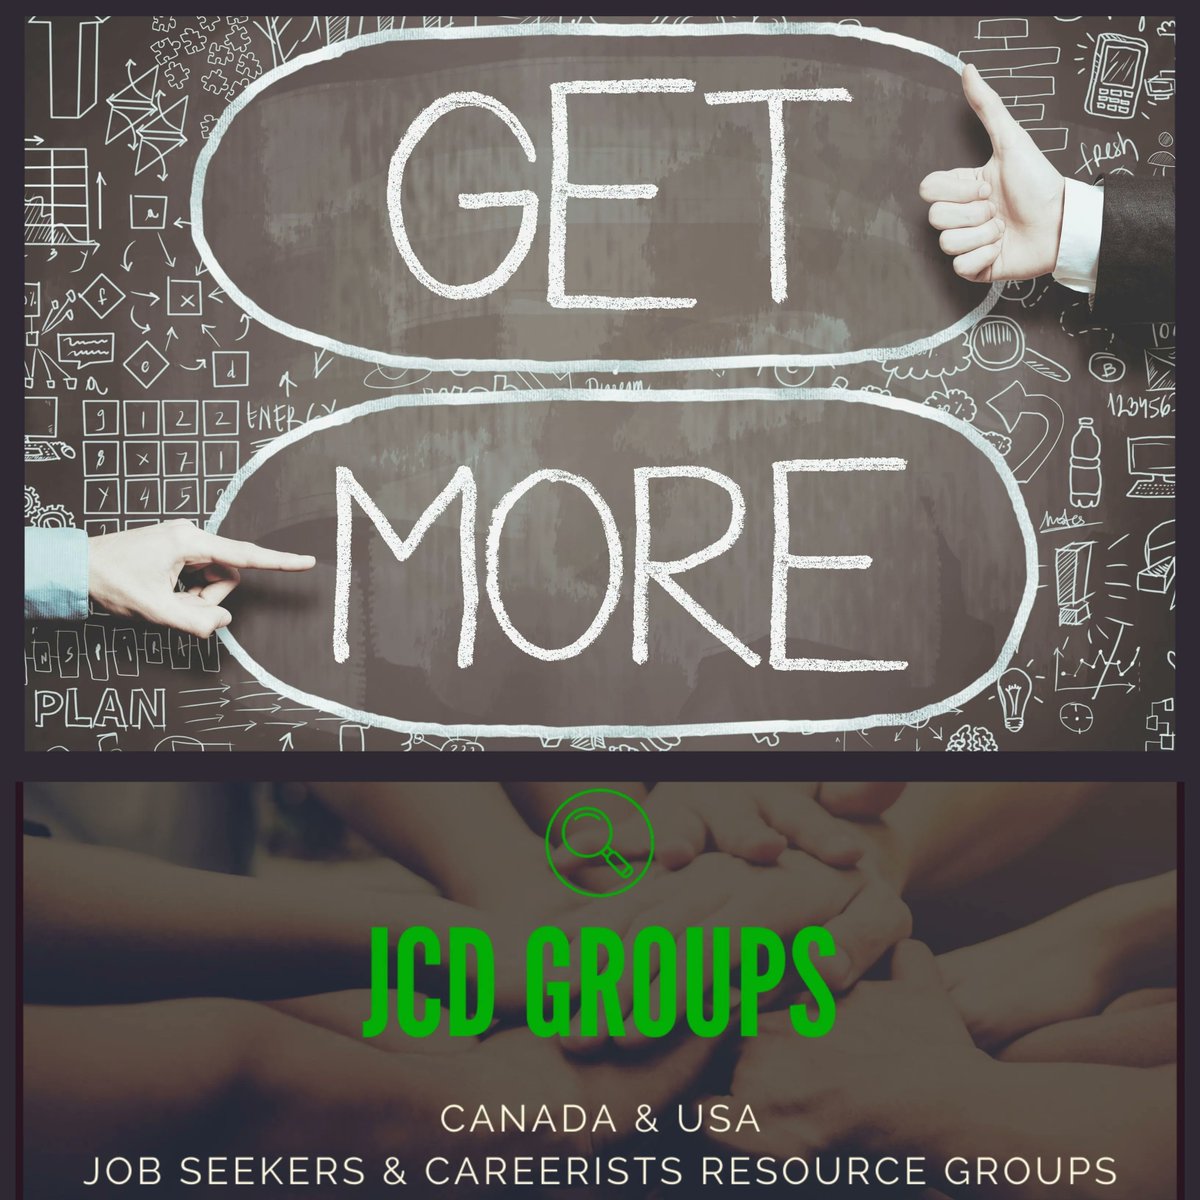 Job Hunting or Hiring in #Canada or #USA? Find #jobs and #talent in our regional #LinkedIn groups. Find and Join yours here buff.ly/3nSTwrX 

#usahiring #jobsinusa #canadajobsearch #getajobincanada #getajobinusa #findjobsincanada #findjobsinusa #usajobsearch #canadahiring